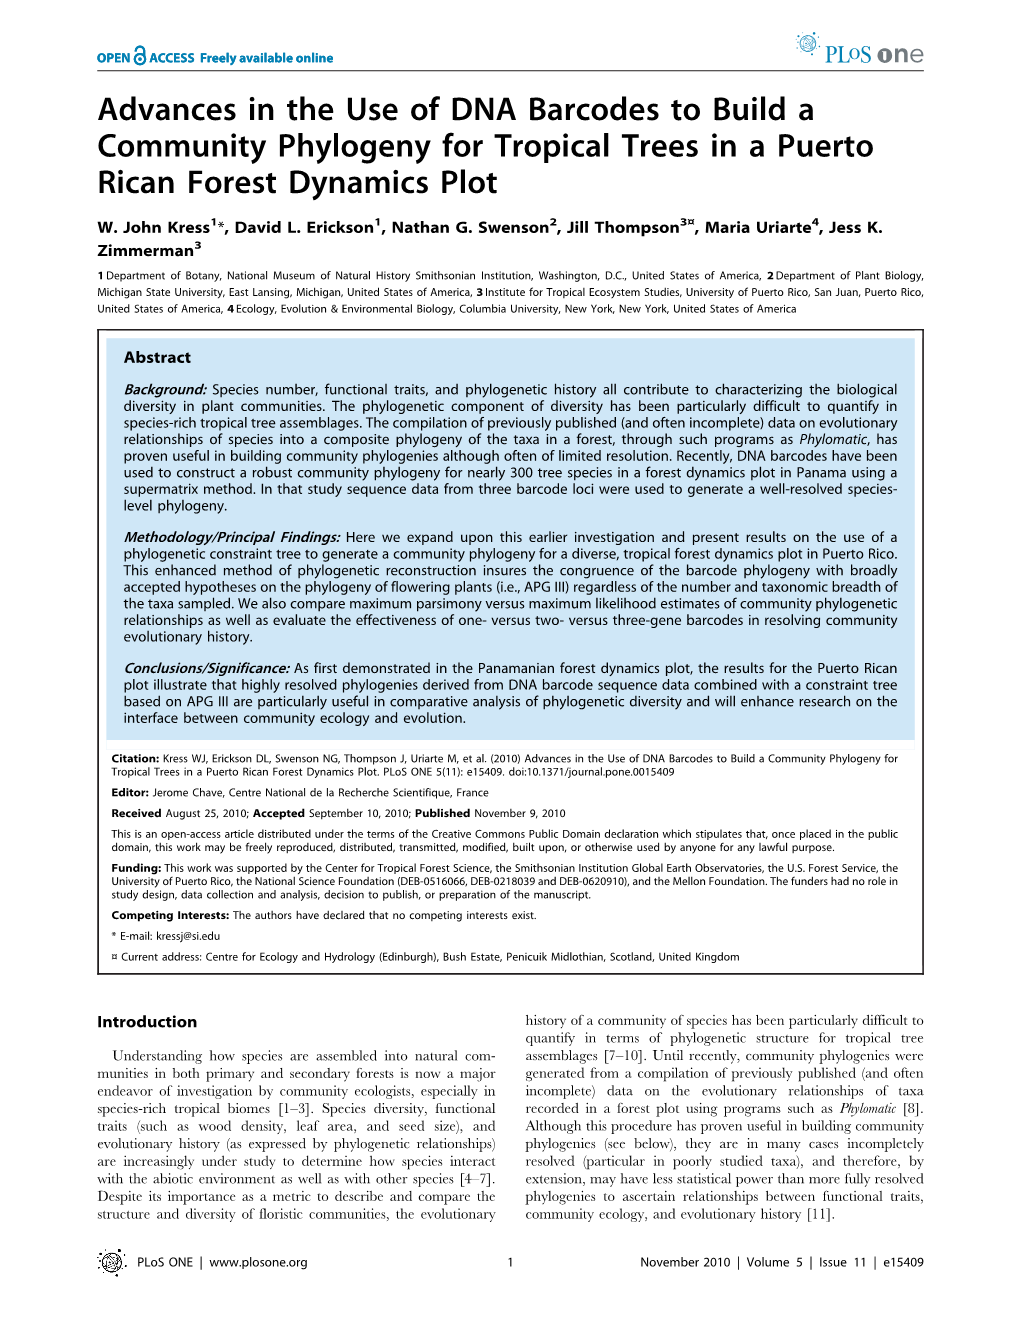 Advances in the Use of DNA Barcodes to Build a Community Phylogeny for Tropical Trees in a Puerto Rican Forest Dynamics Plot